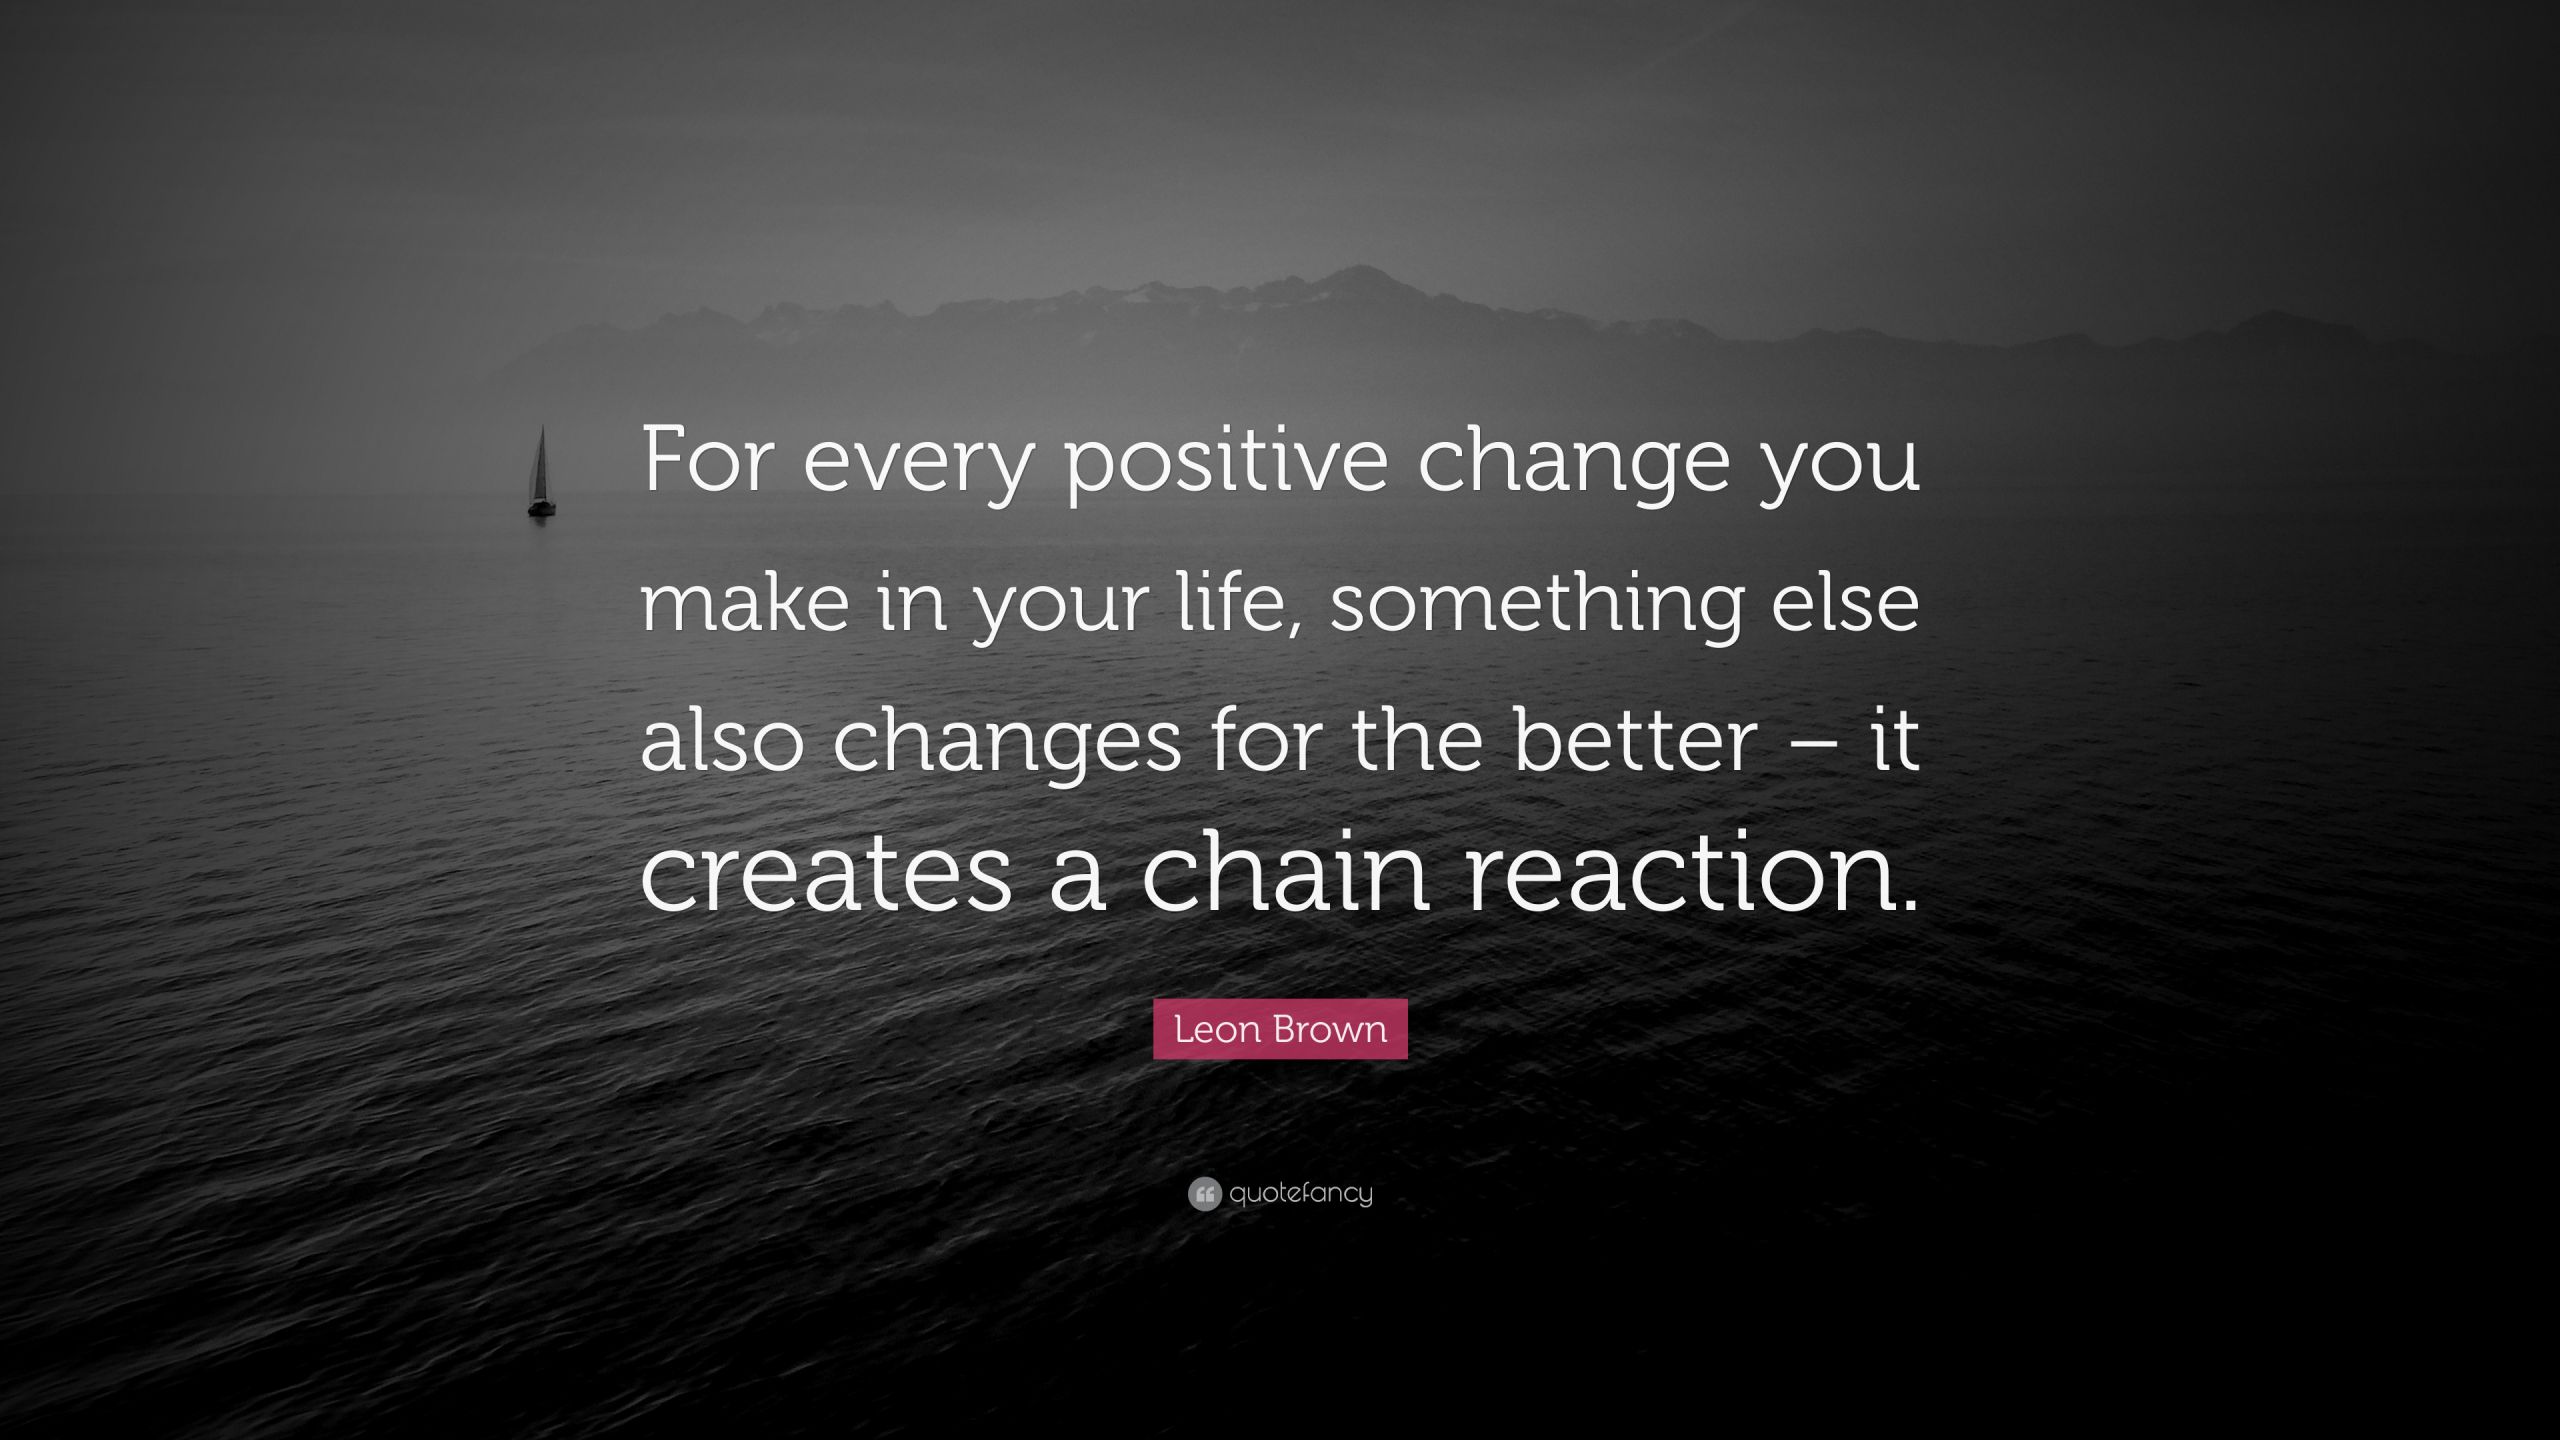 Quotes About Positive Changes
 Leon Brown Quote “For every positive change you make in